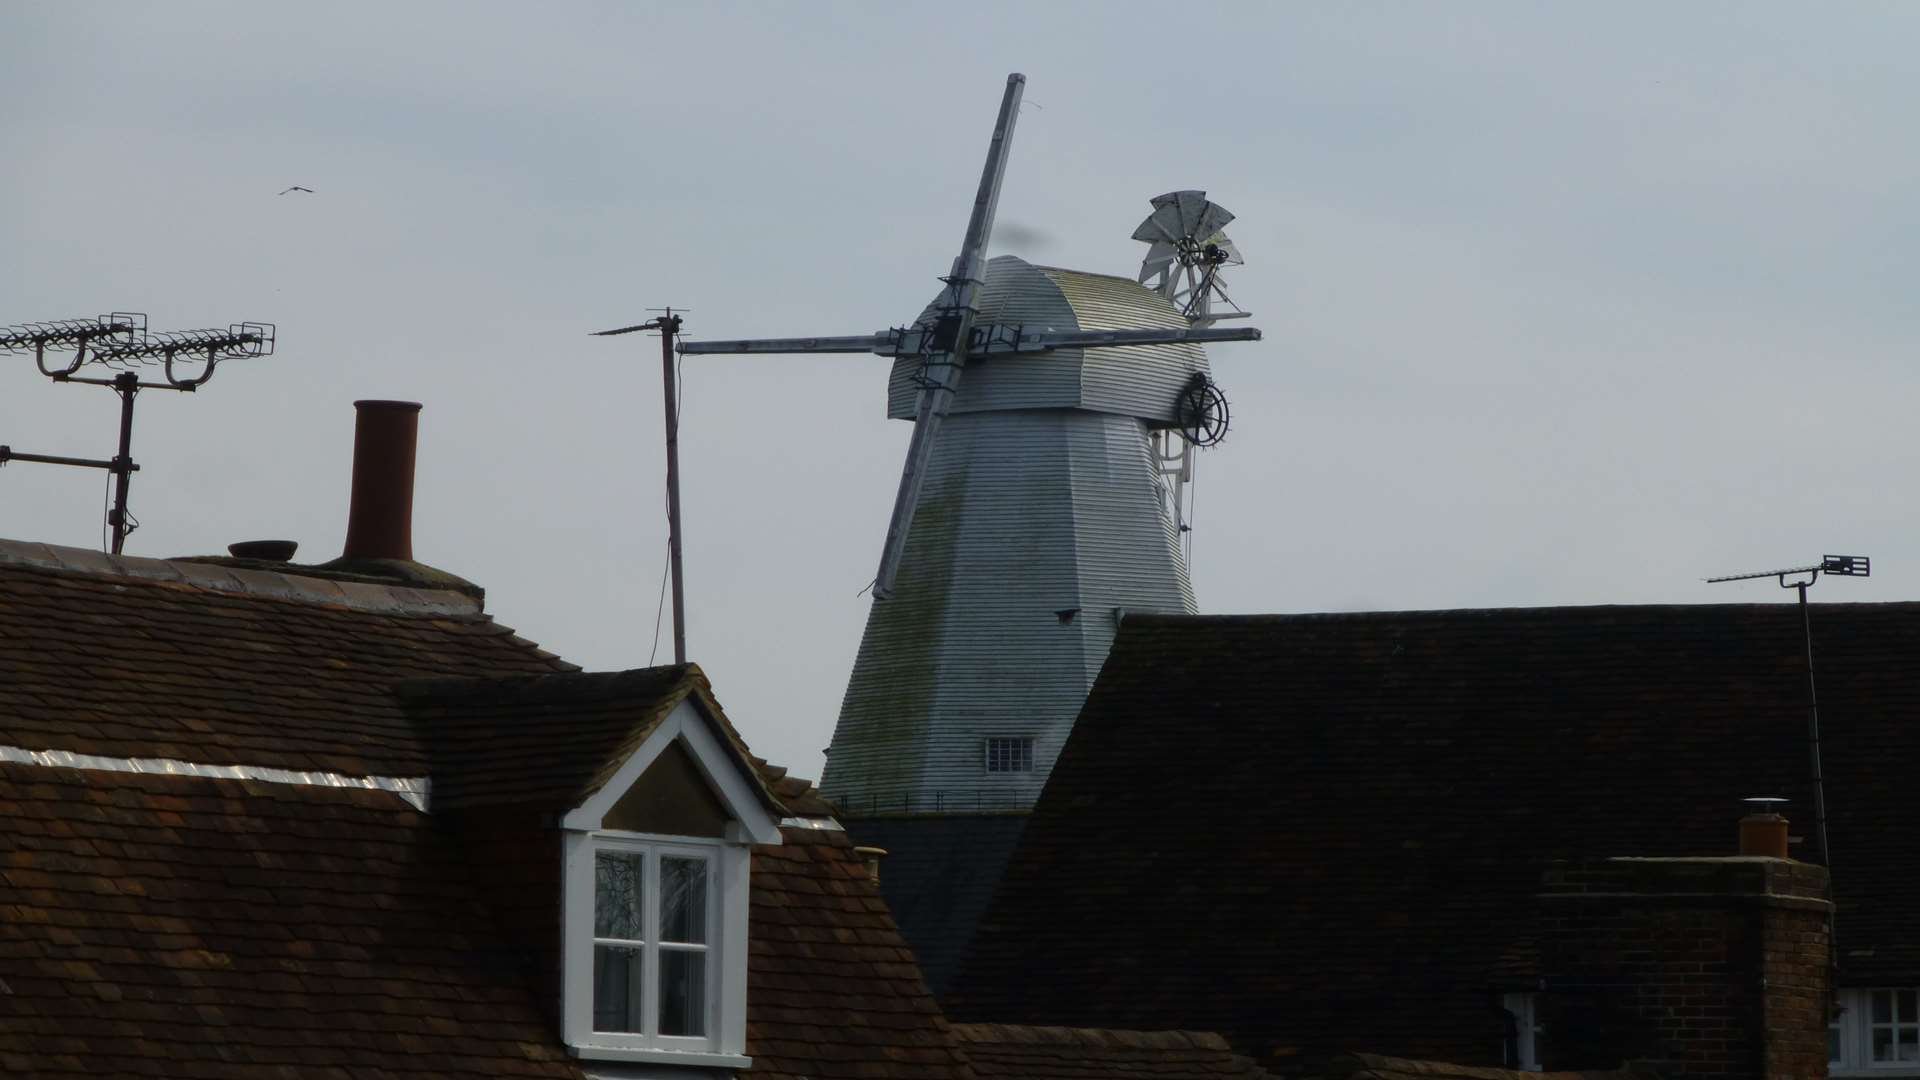 The mill dominates the town's skyline